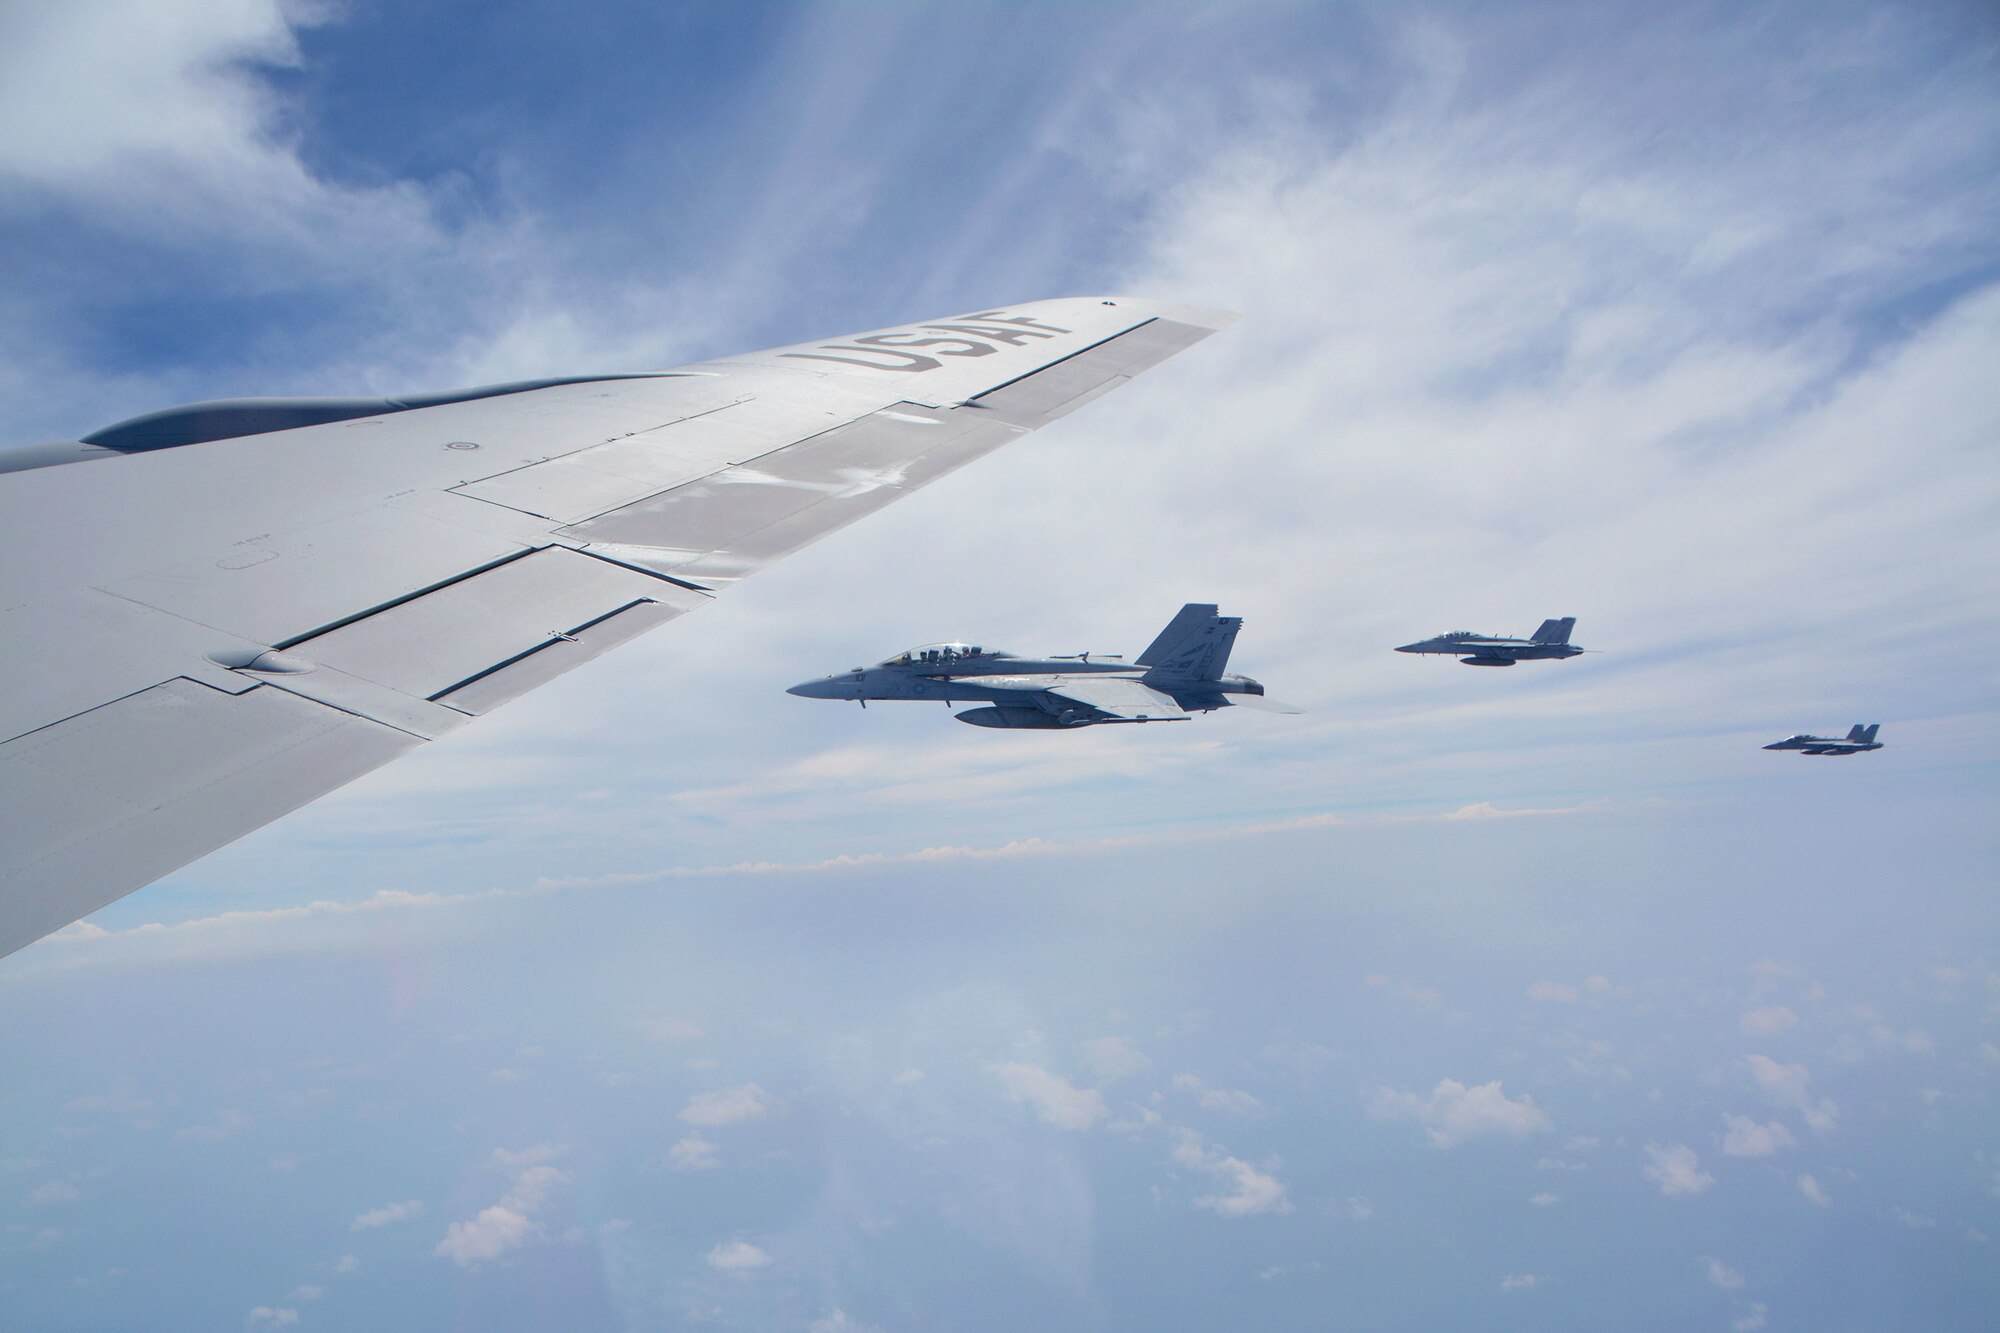 Three U.S. Navy F/A-18 Super Hornets from Carrier Air Wing Two, assigned to the aircraft carrier USS Carl Vinson (CVN 70), fly over the Pacific Ocean alongside a 507th Air Refueling Wing KC-135R Stratotanker from Tinker Air Force Base, Oklahoma, while participating in the Rim of the Pacific (RIMPAC) exercise, July 10. Twenty-five nations, 46 ships, five submarines, and about 200 aircraft and 25,000 personnel are participating in RIMPAC from June 27 to Aug. 2 in and around the Hawaiian Islands and Southern California. The world’s largest international maritime exercise, RIMPAC provides a unique training opportunity while fostering and sustaining cooperative relationships among participants critical to ensuring the safety of sea lanes and security of the world’s oceans. RIMPAC 2018 is the 26th exercise in the series that began in 1971. (U.S. Air Force photo by Tech. Sgt. Samantha Mathison)